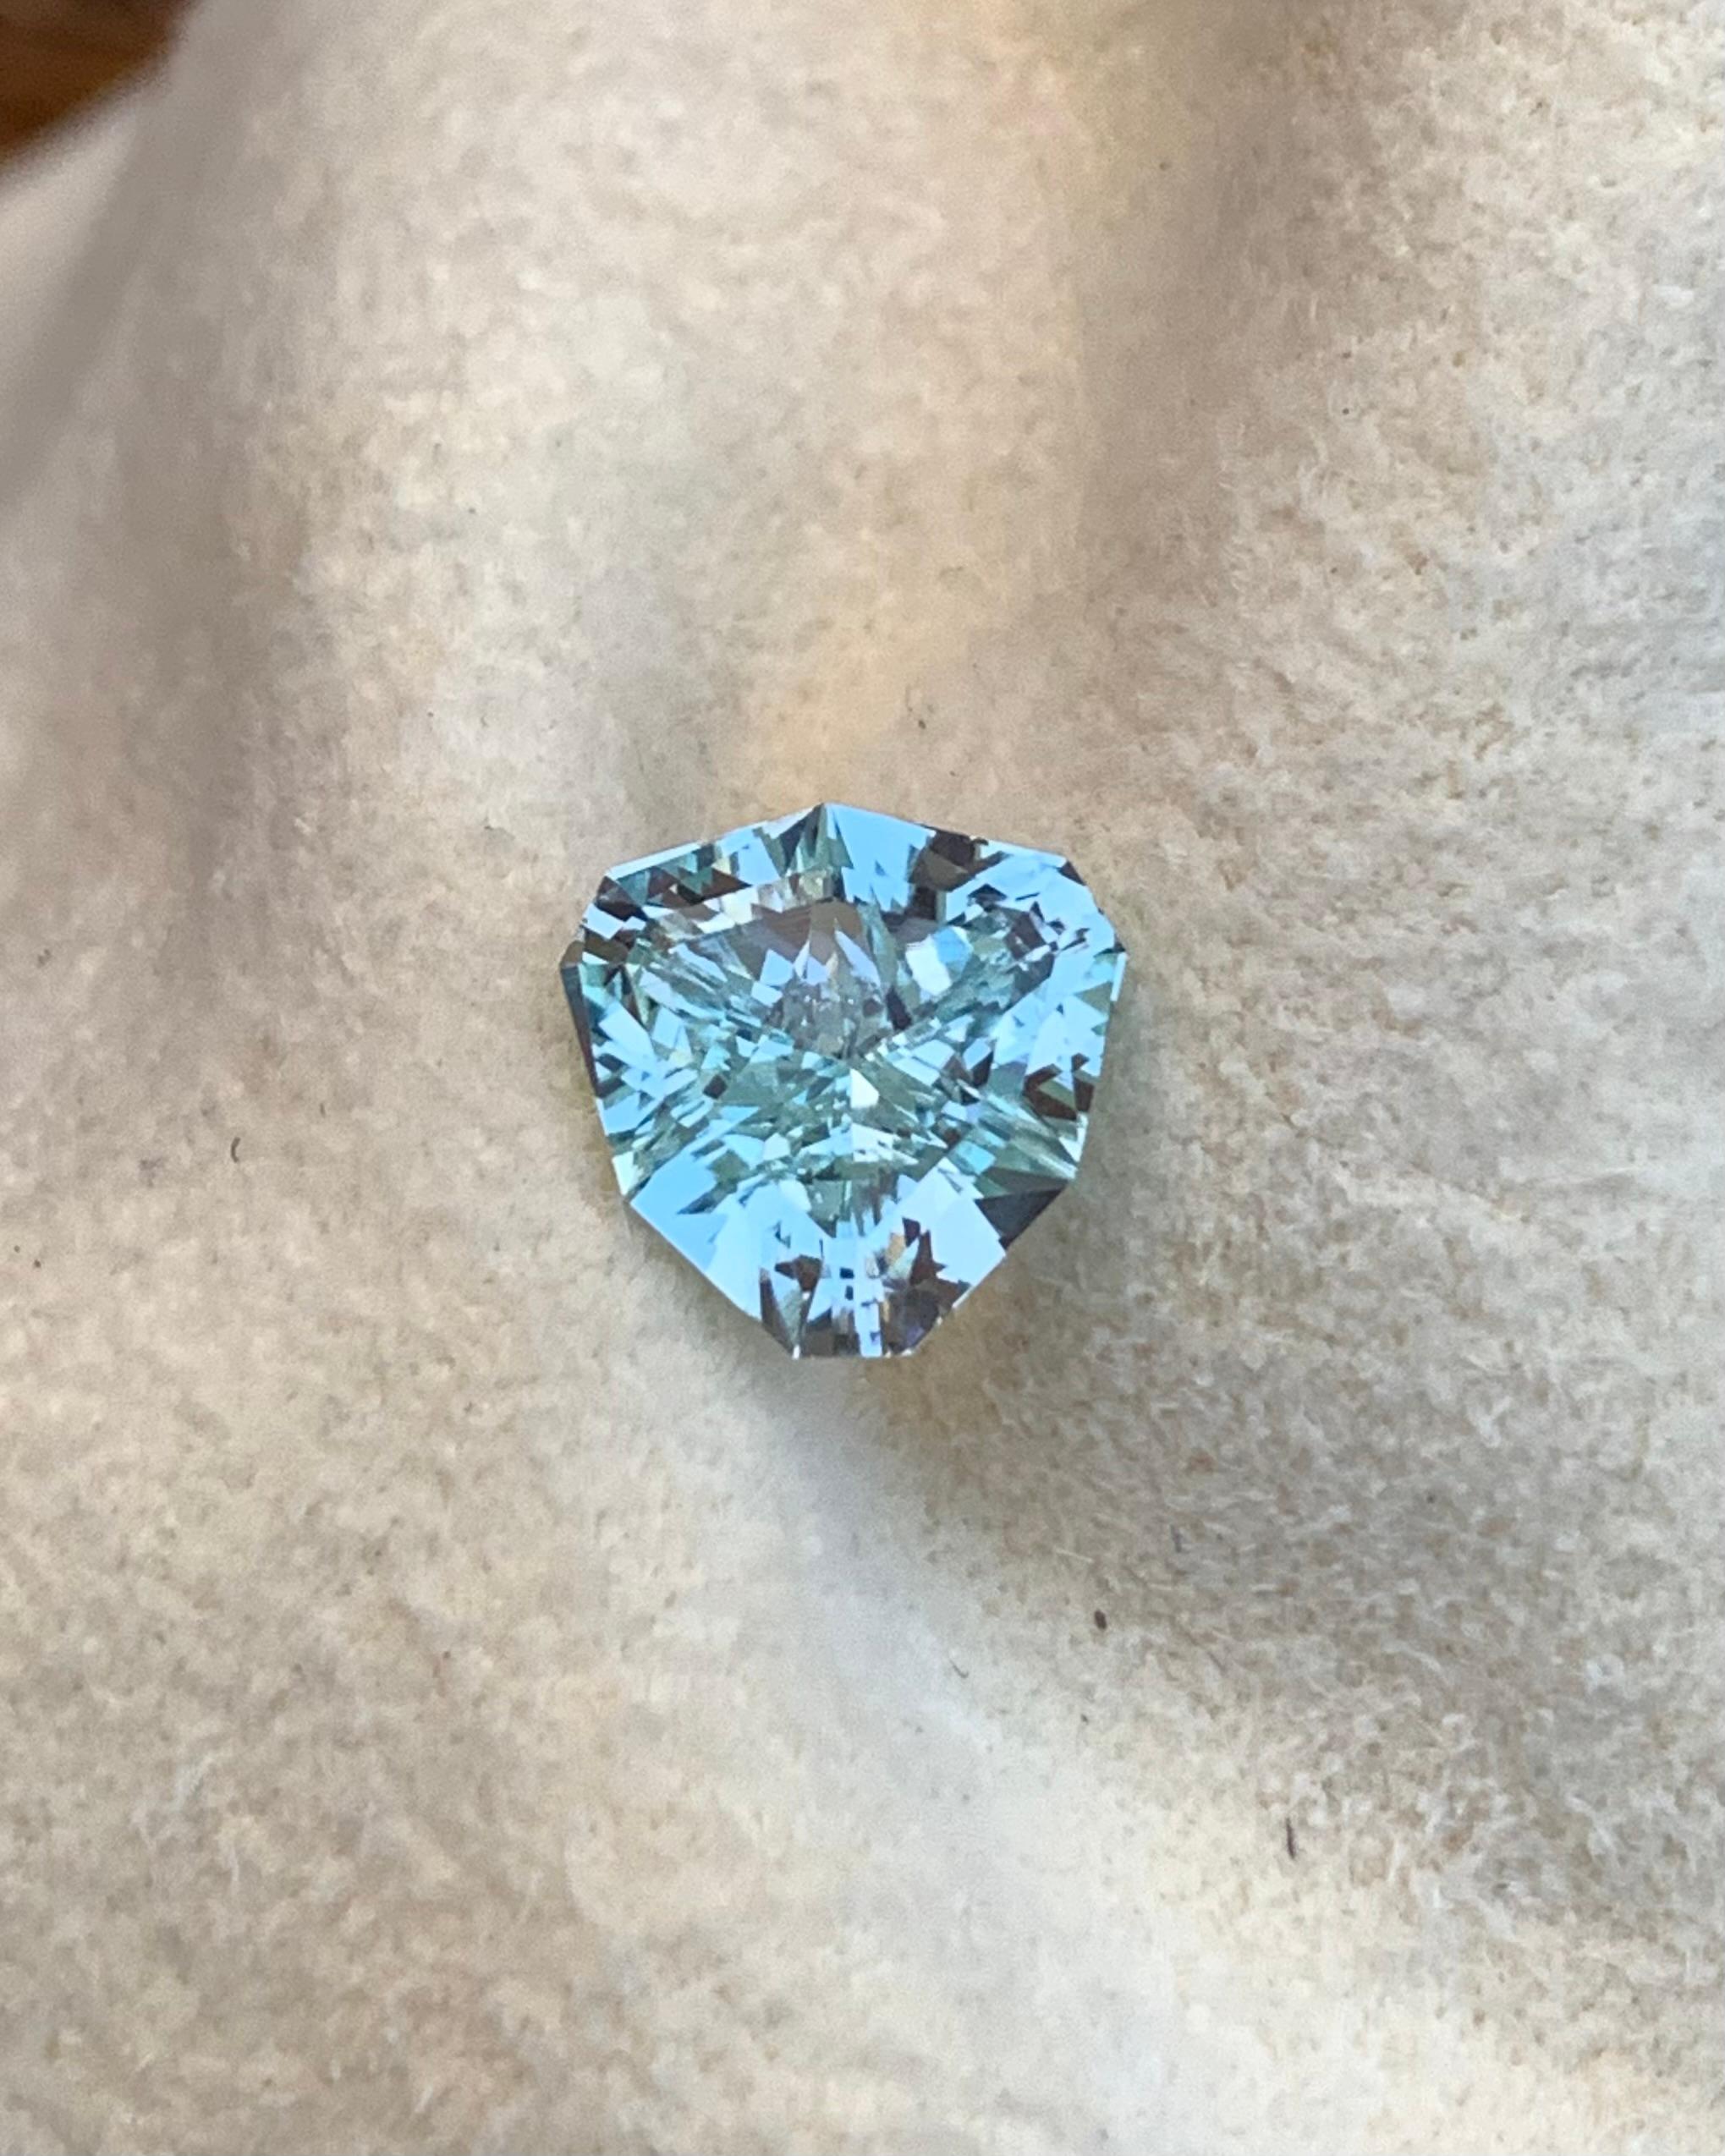 Gemstone Type : Aquamarine
Weight : 3.90 Carats
Dimensions : 10.5x10.6x6.8 mm
Clarity : Eye Clean
Origin : Pakistan
Shape: Shield
Color: Light Blue
Certificate: On Demand
Birthstone Month: March
It has a shielding effect on your energy field and has